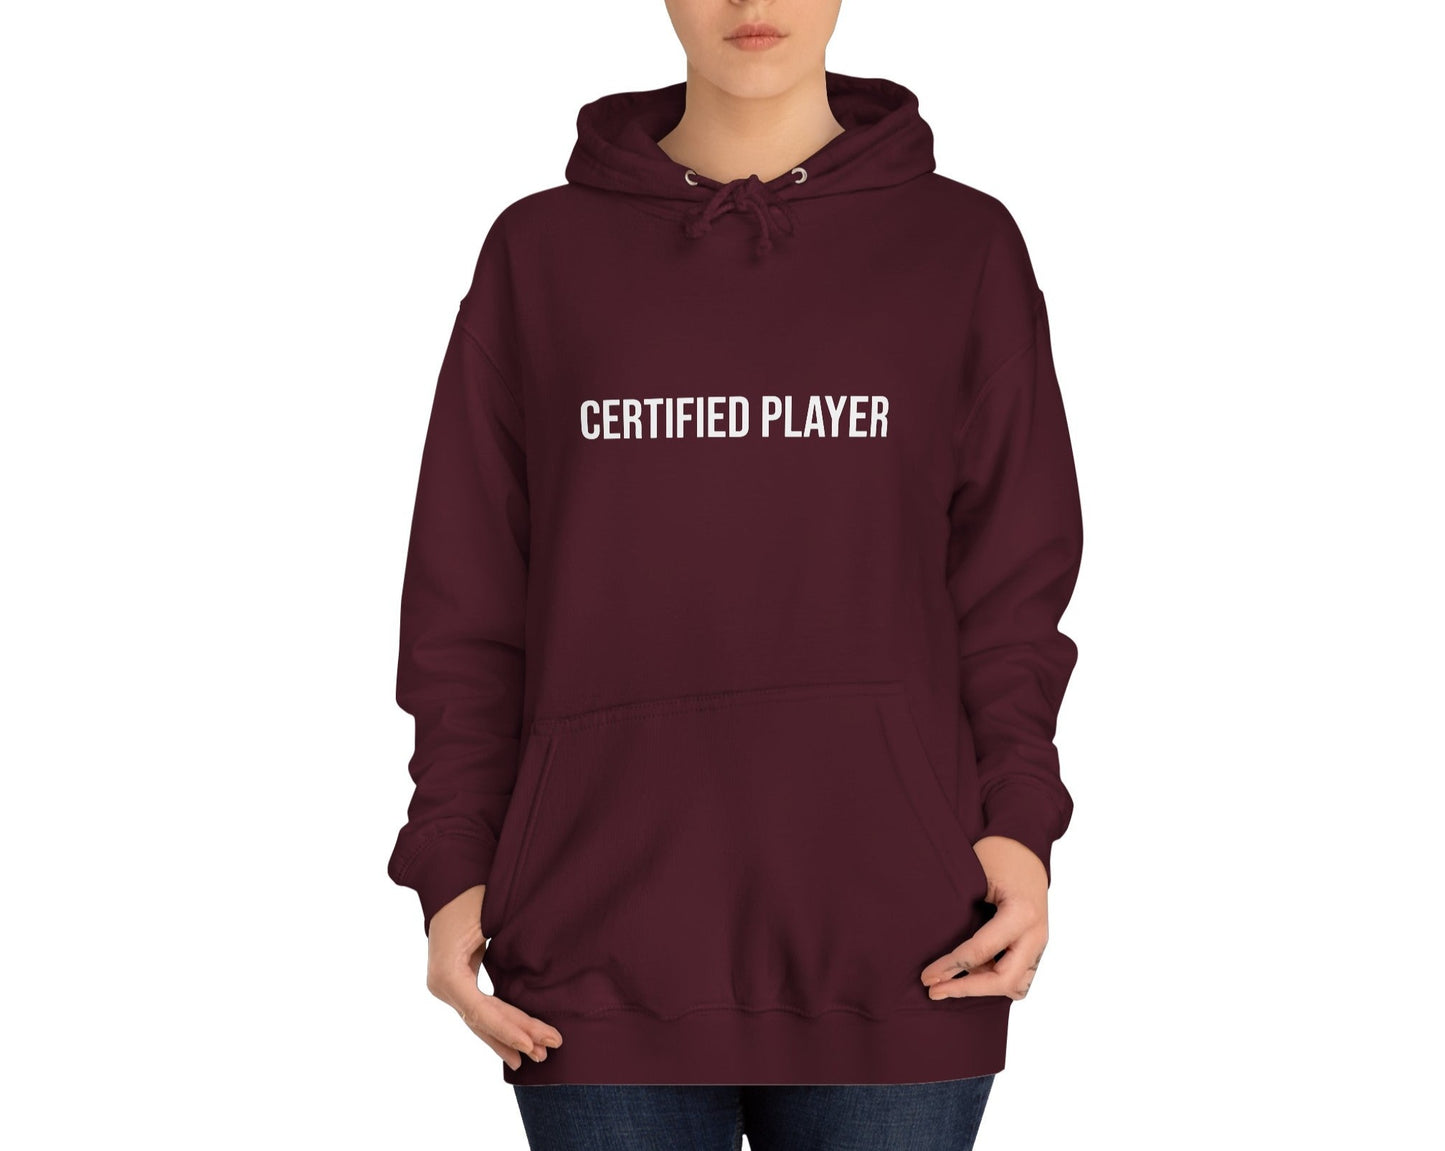 CERTIFIED PLAYER